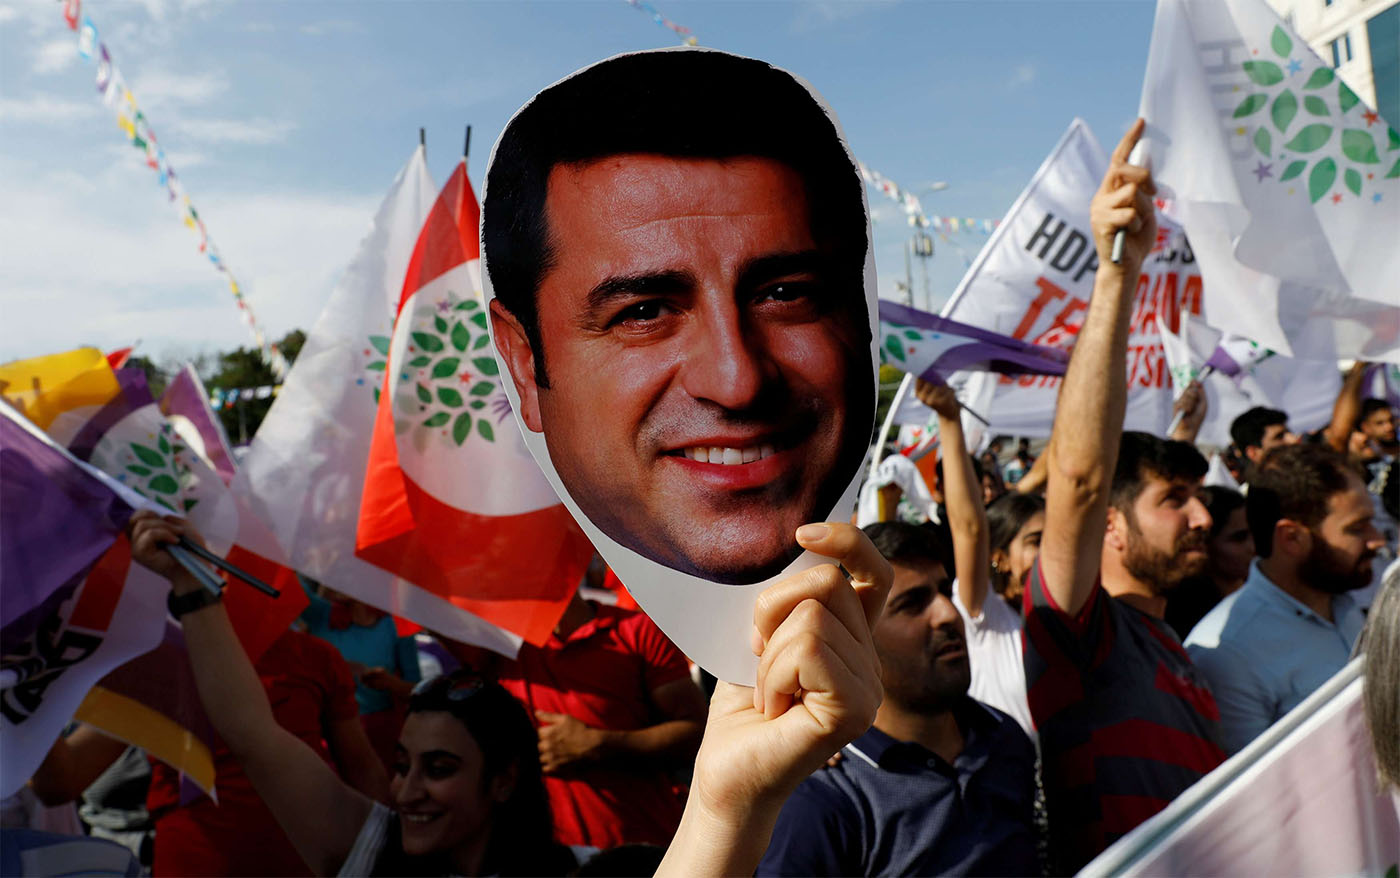 Demirtas was a member of parliament at the time of his arrest two years ago